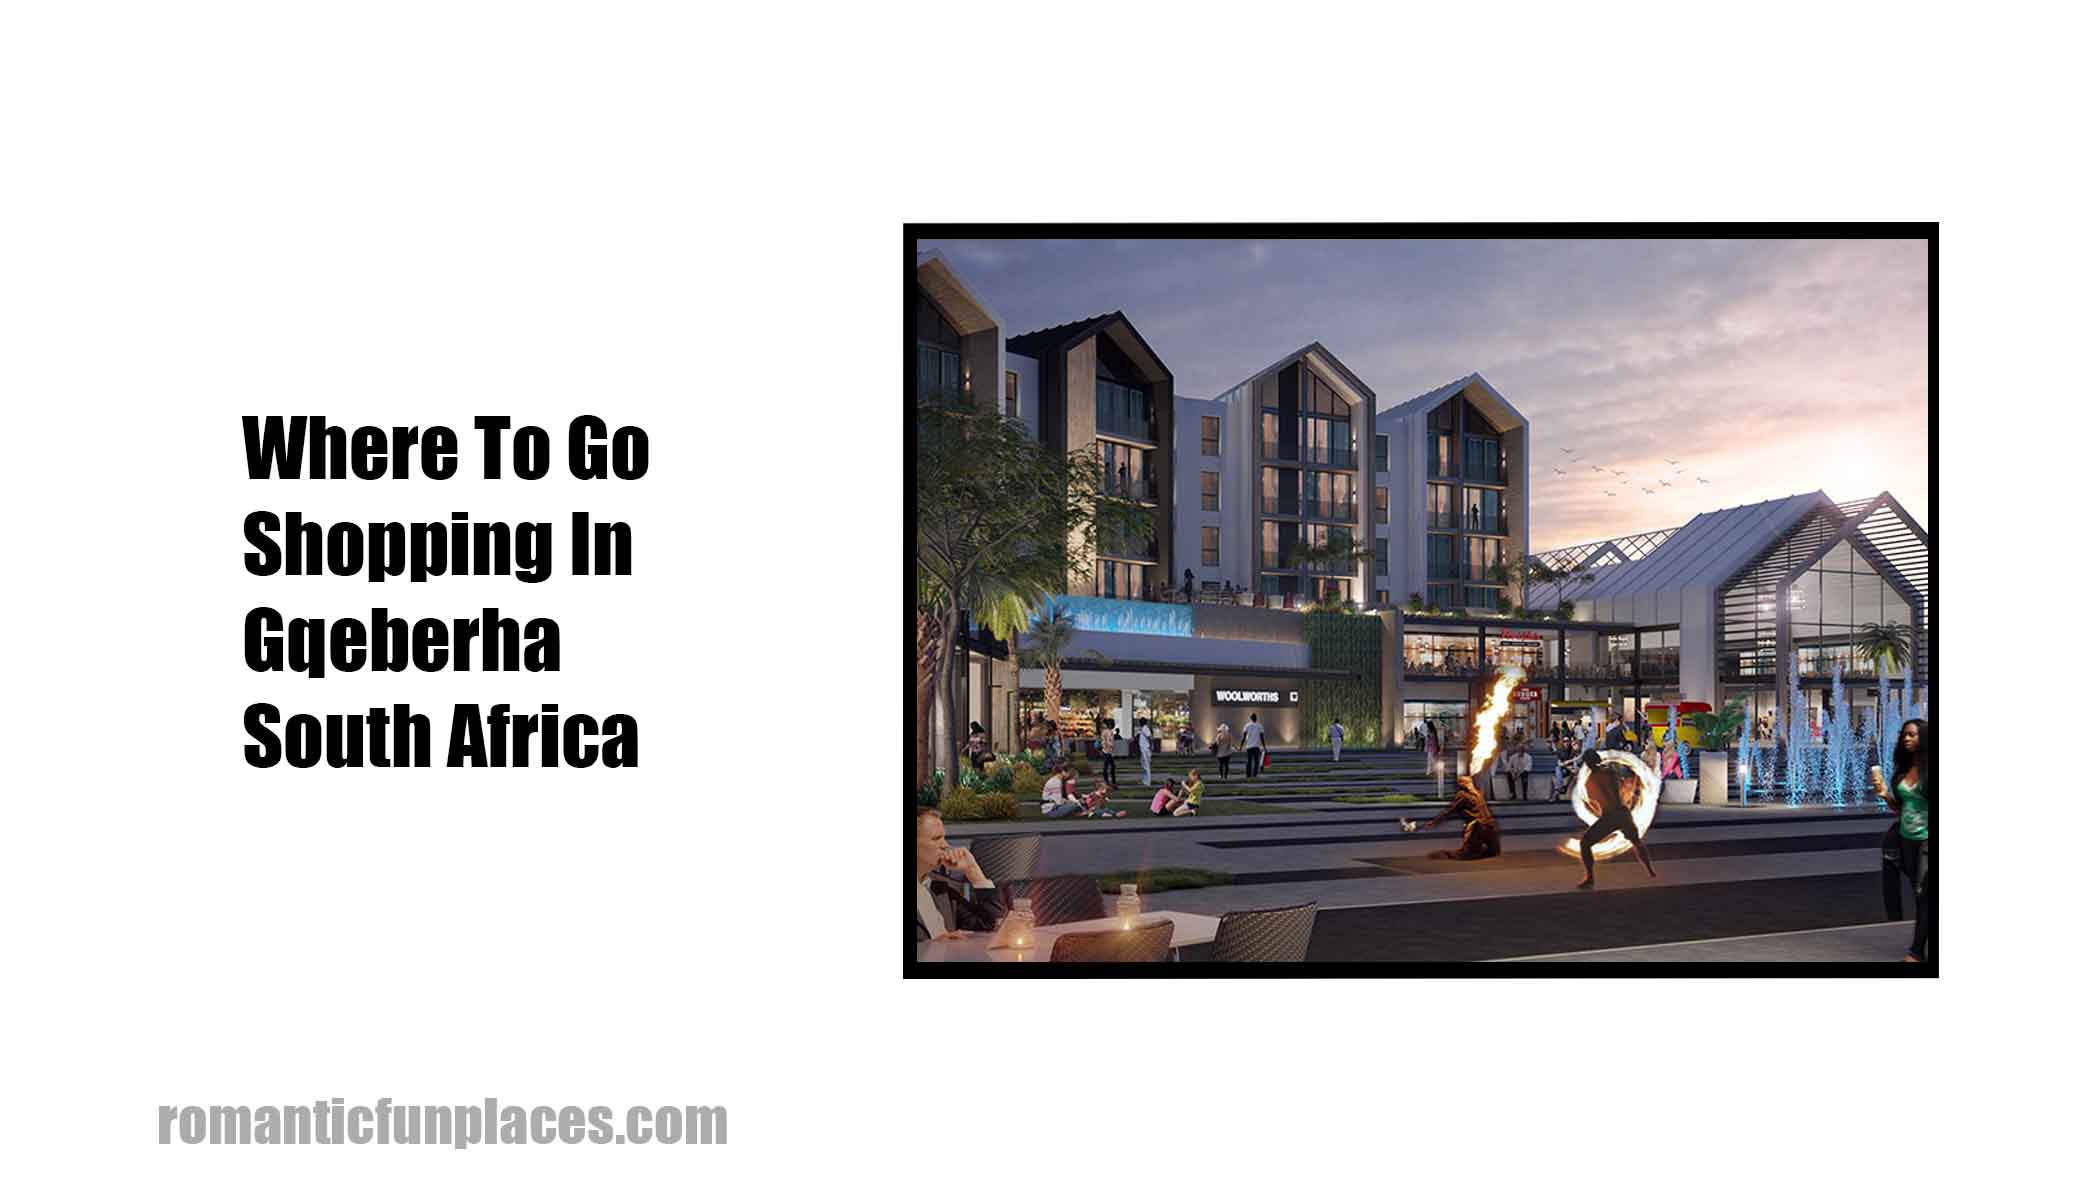 Where To Go Shopping In Gqeberha South Africa